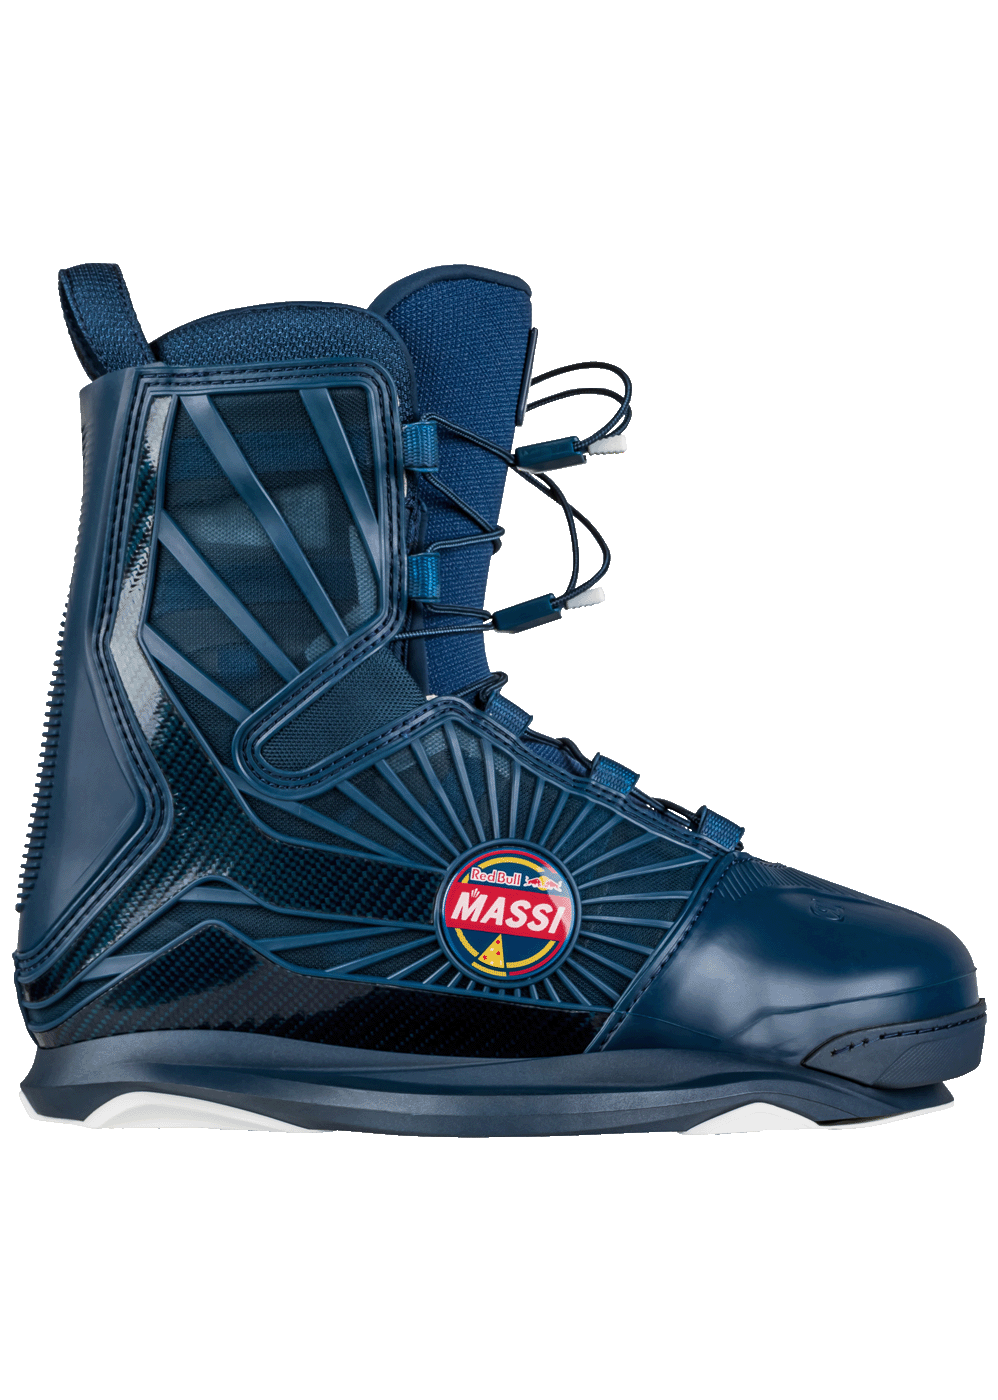 2022 RONIX RXT BOOTS | Red Bull®